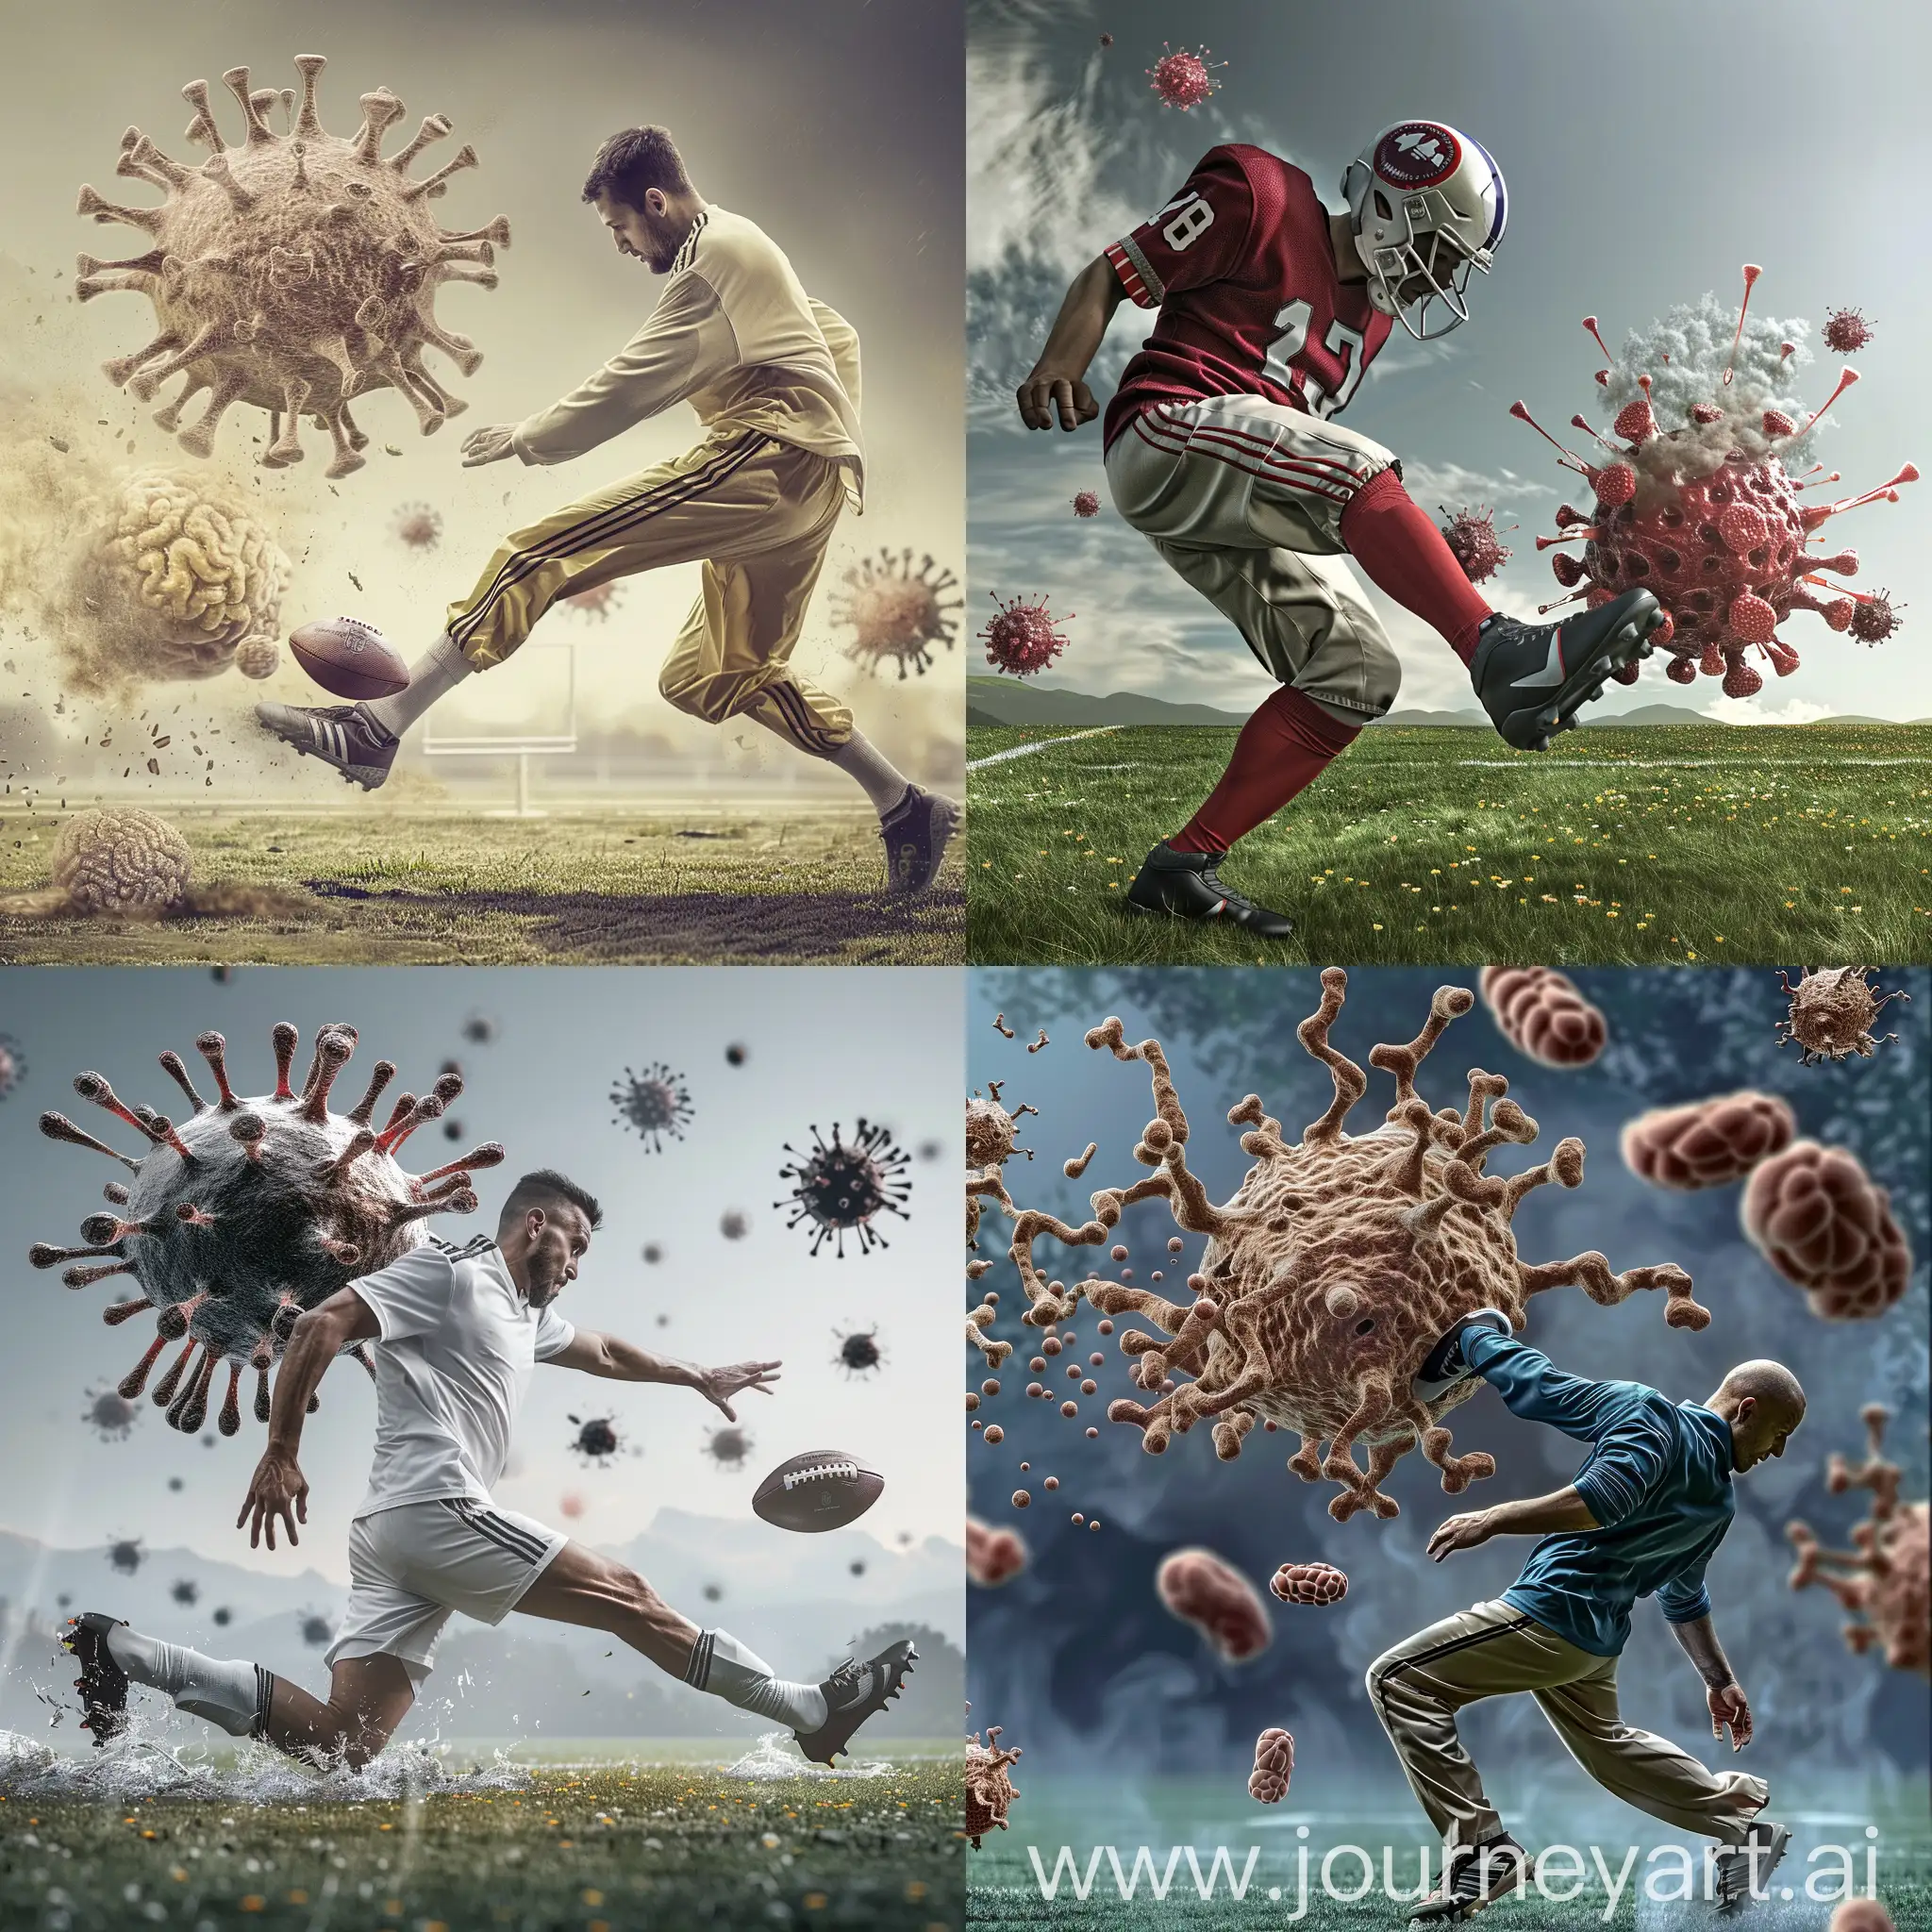 Precision-Football-Kick-Interacts-with-Human-Cell